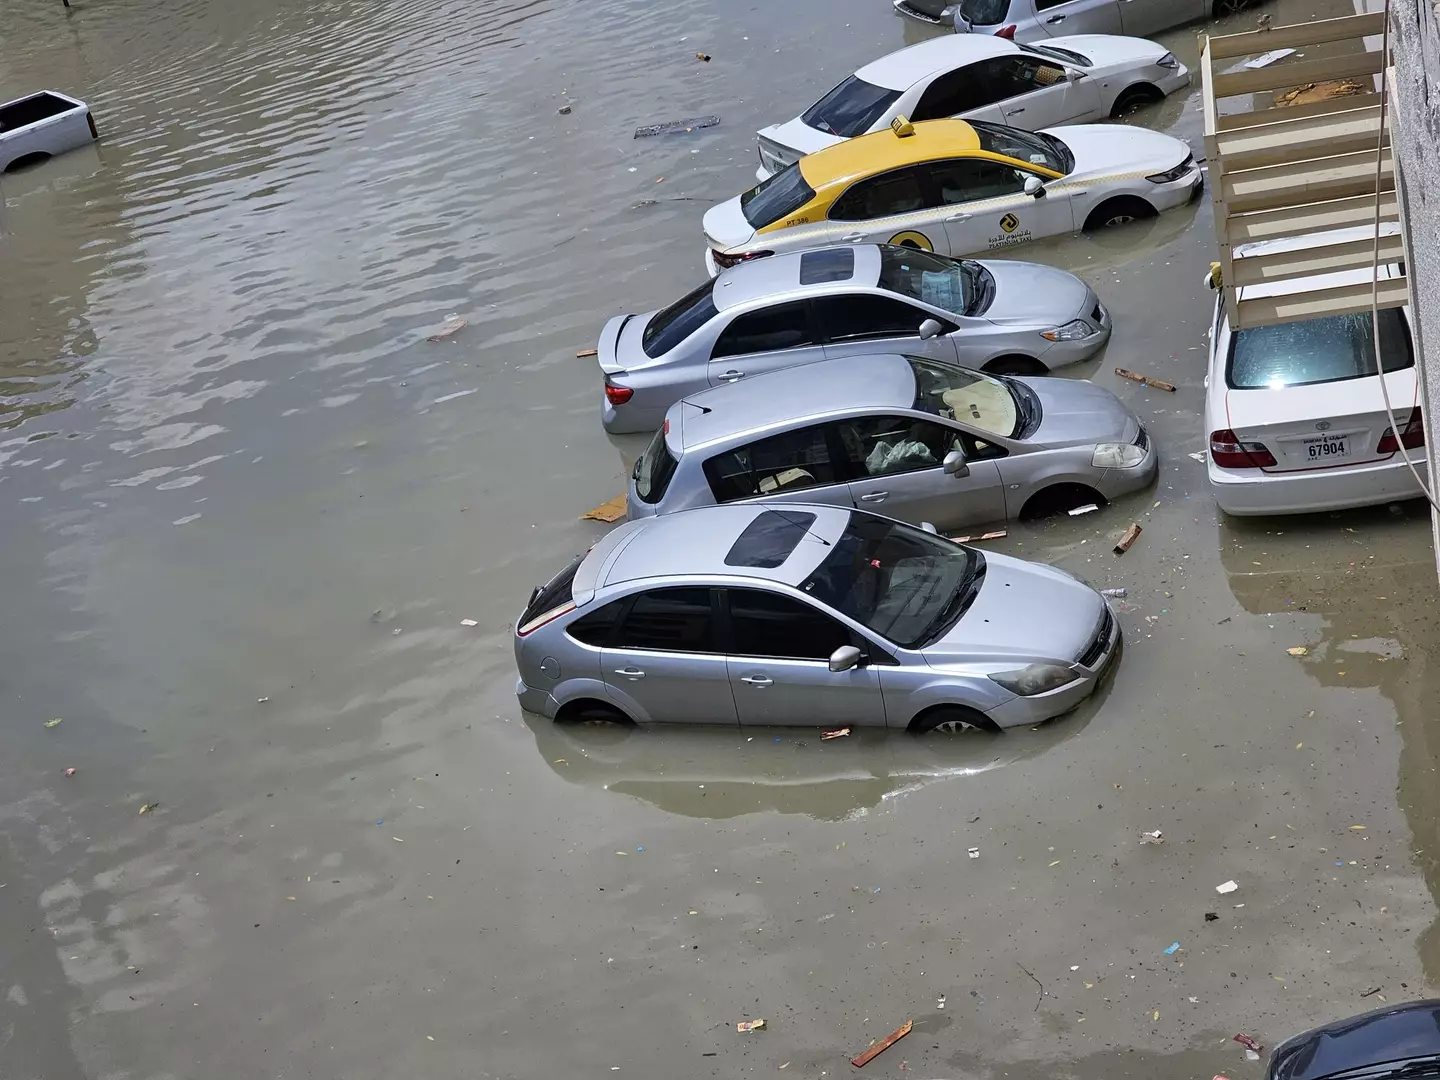 Almost two years of rainfall in Dubai has submerged roads, cars, trains and buildings. (Stringer/Anadolu via Getty Images)